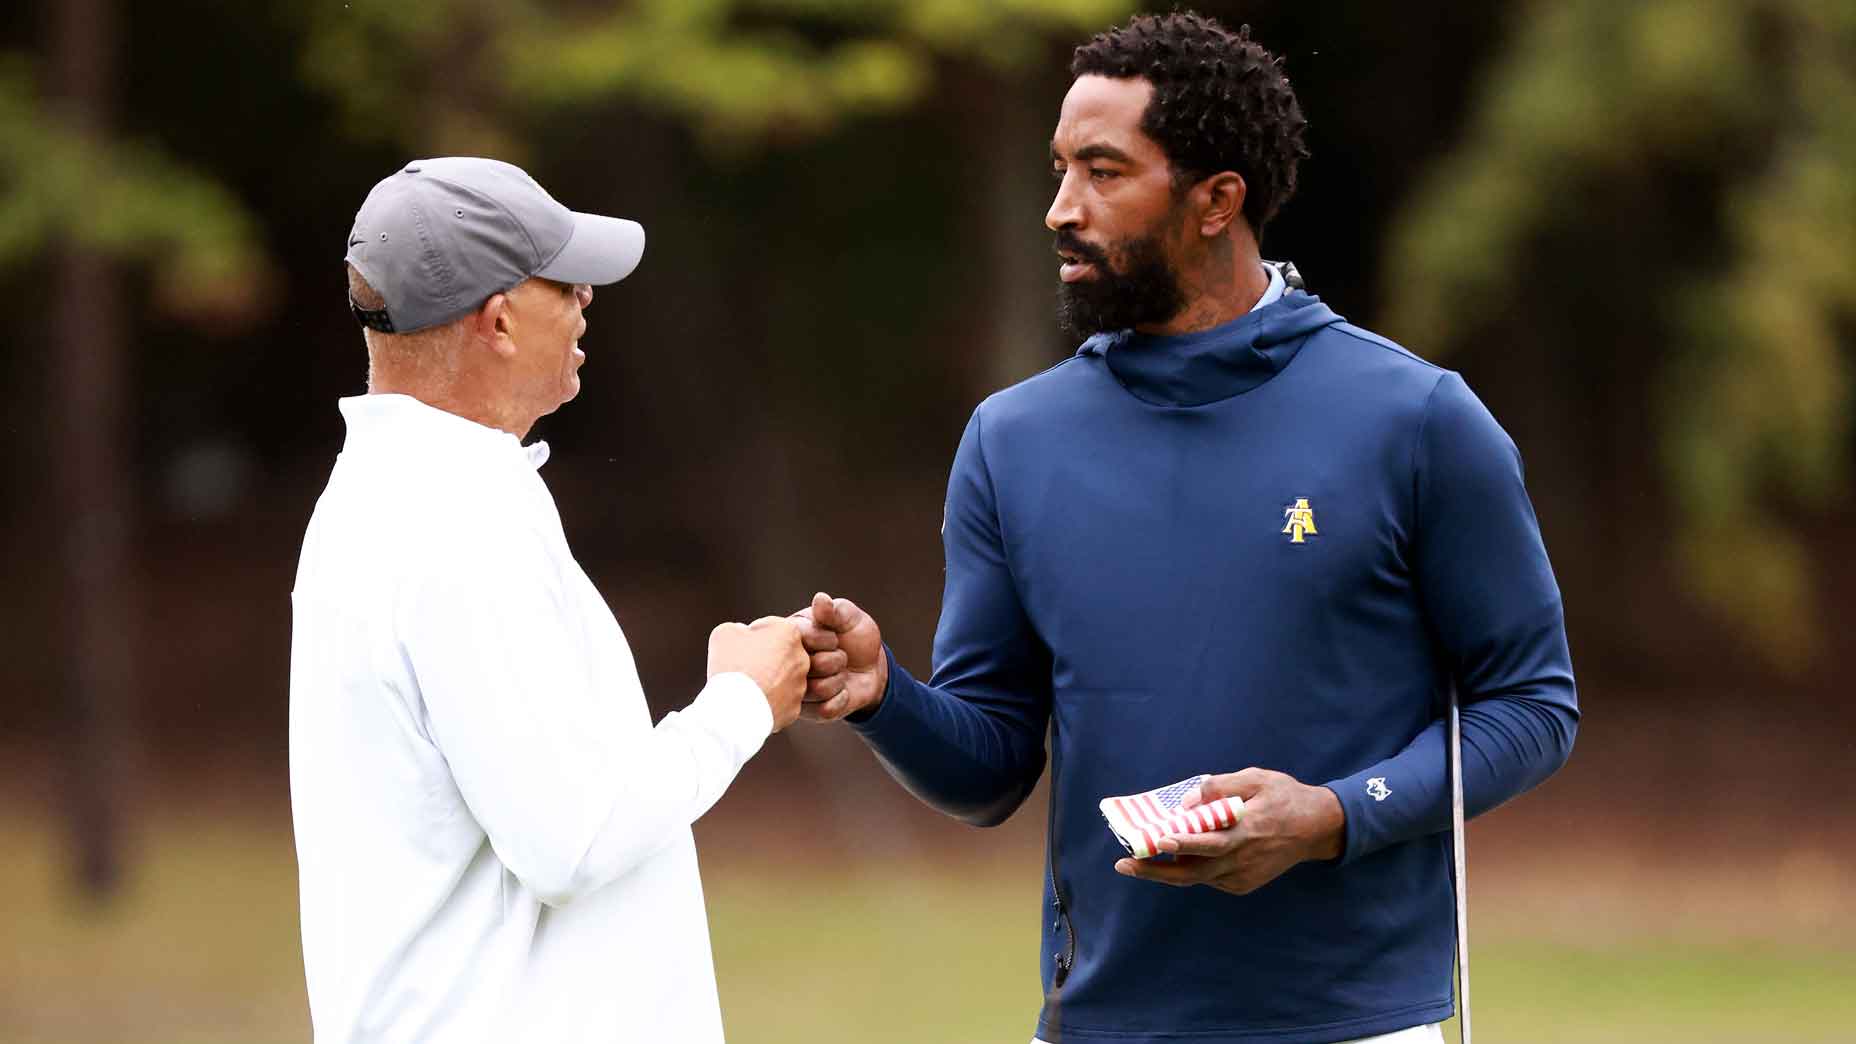 Former NBA player J.R. Smith gets a word of encouragement from head coach Richard Watkins of the North Carolina A&T Aggies during the Phoenix Invitational at Alamance Country Club on October 11, 2021 in Burlington, North Carolina.